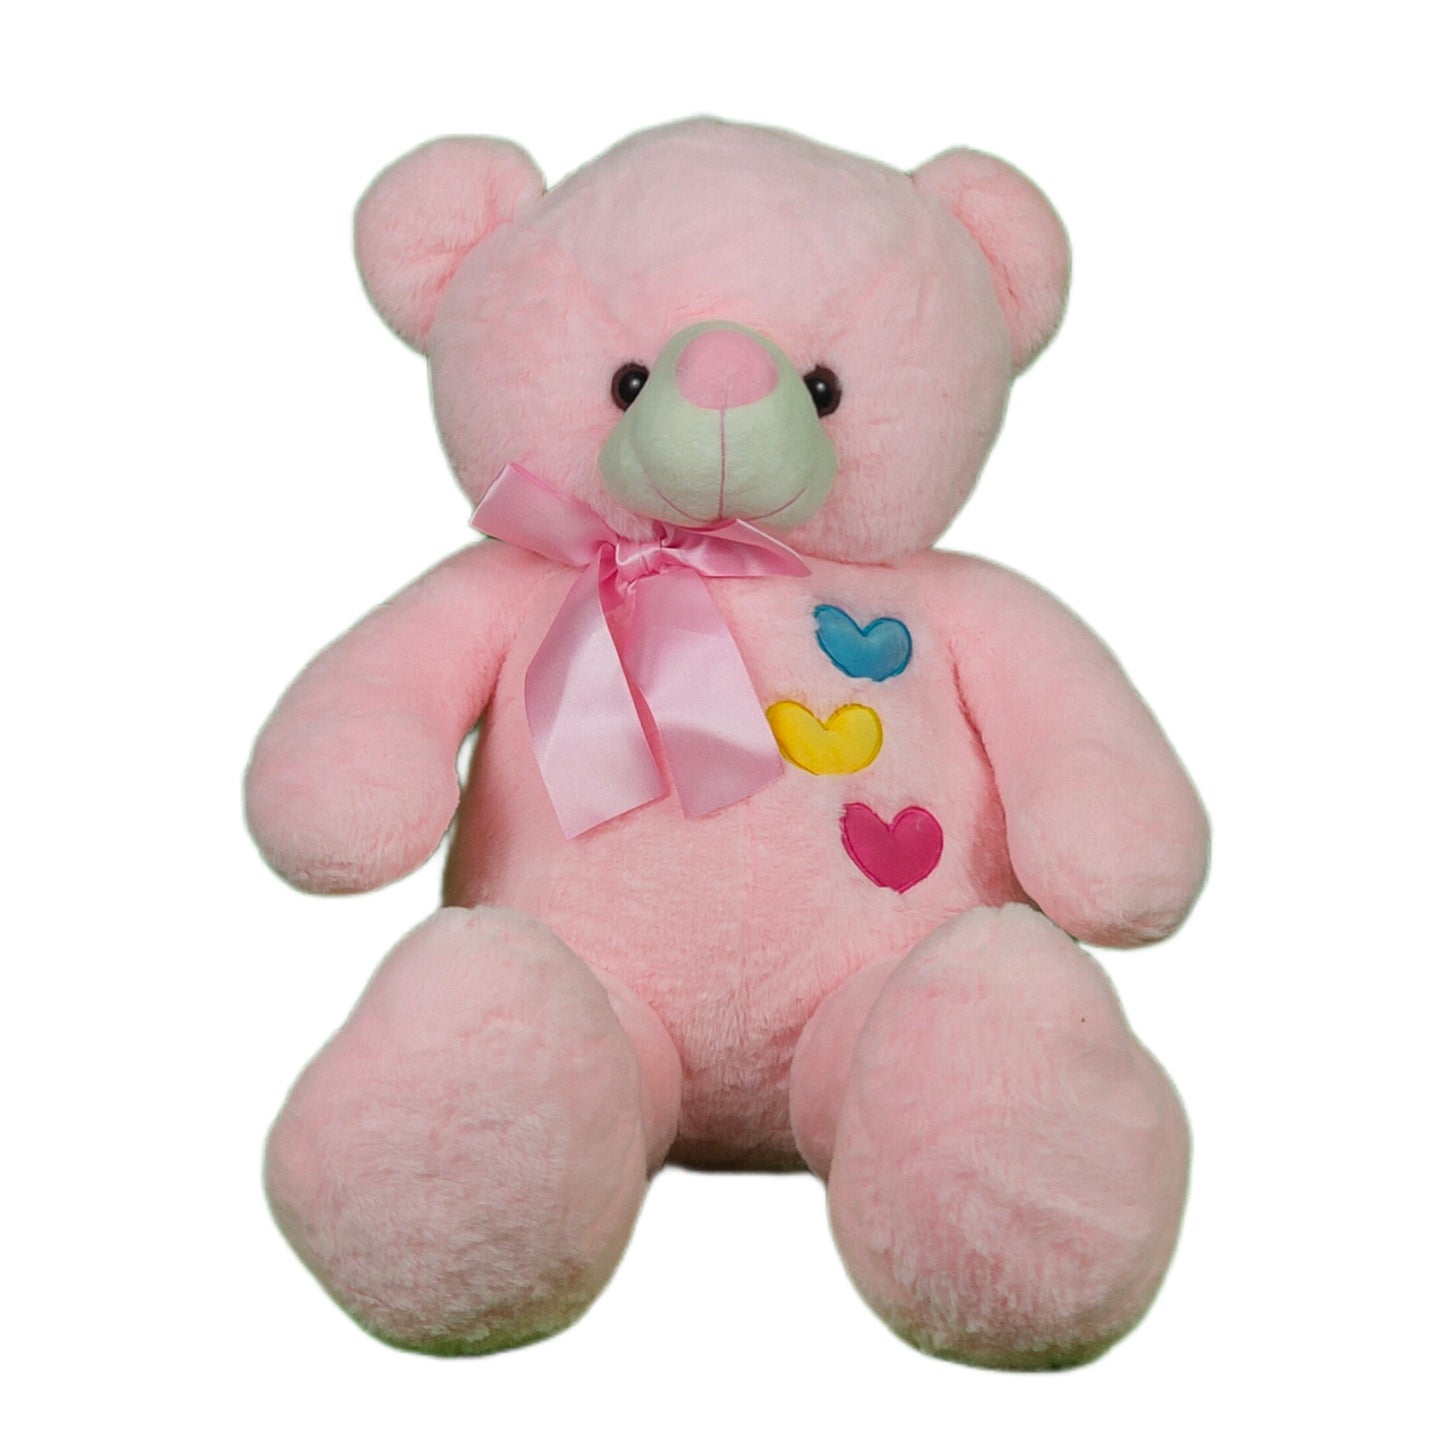 Sam Teddy Bear Plush Soft Toy For Ages 2 Years And Up Girls Gift, 90cm